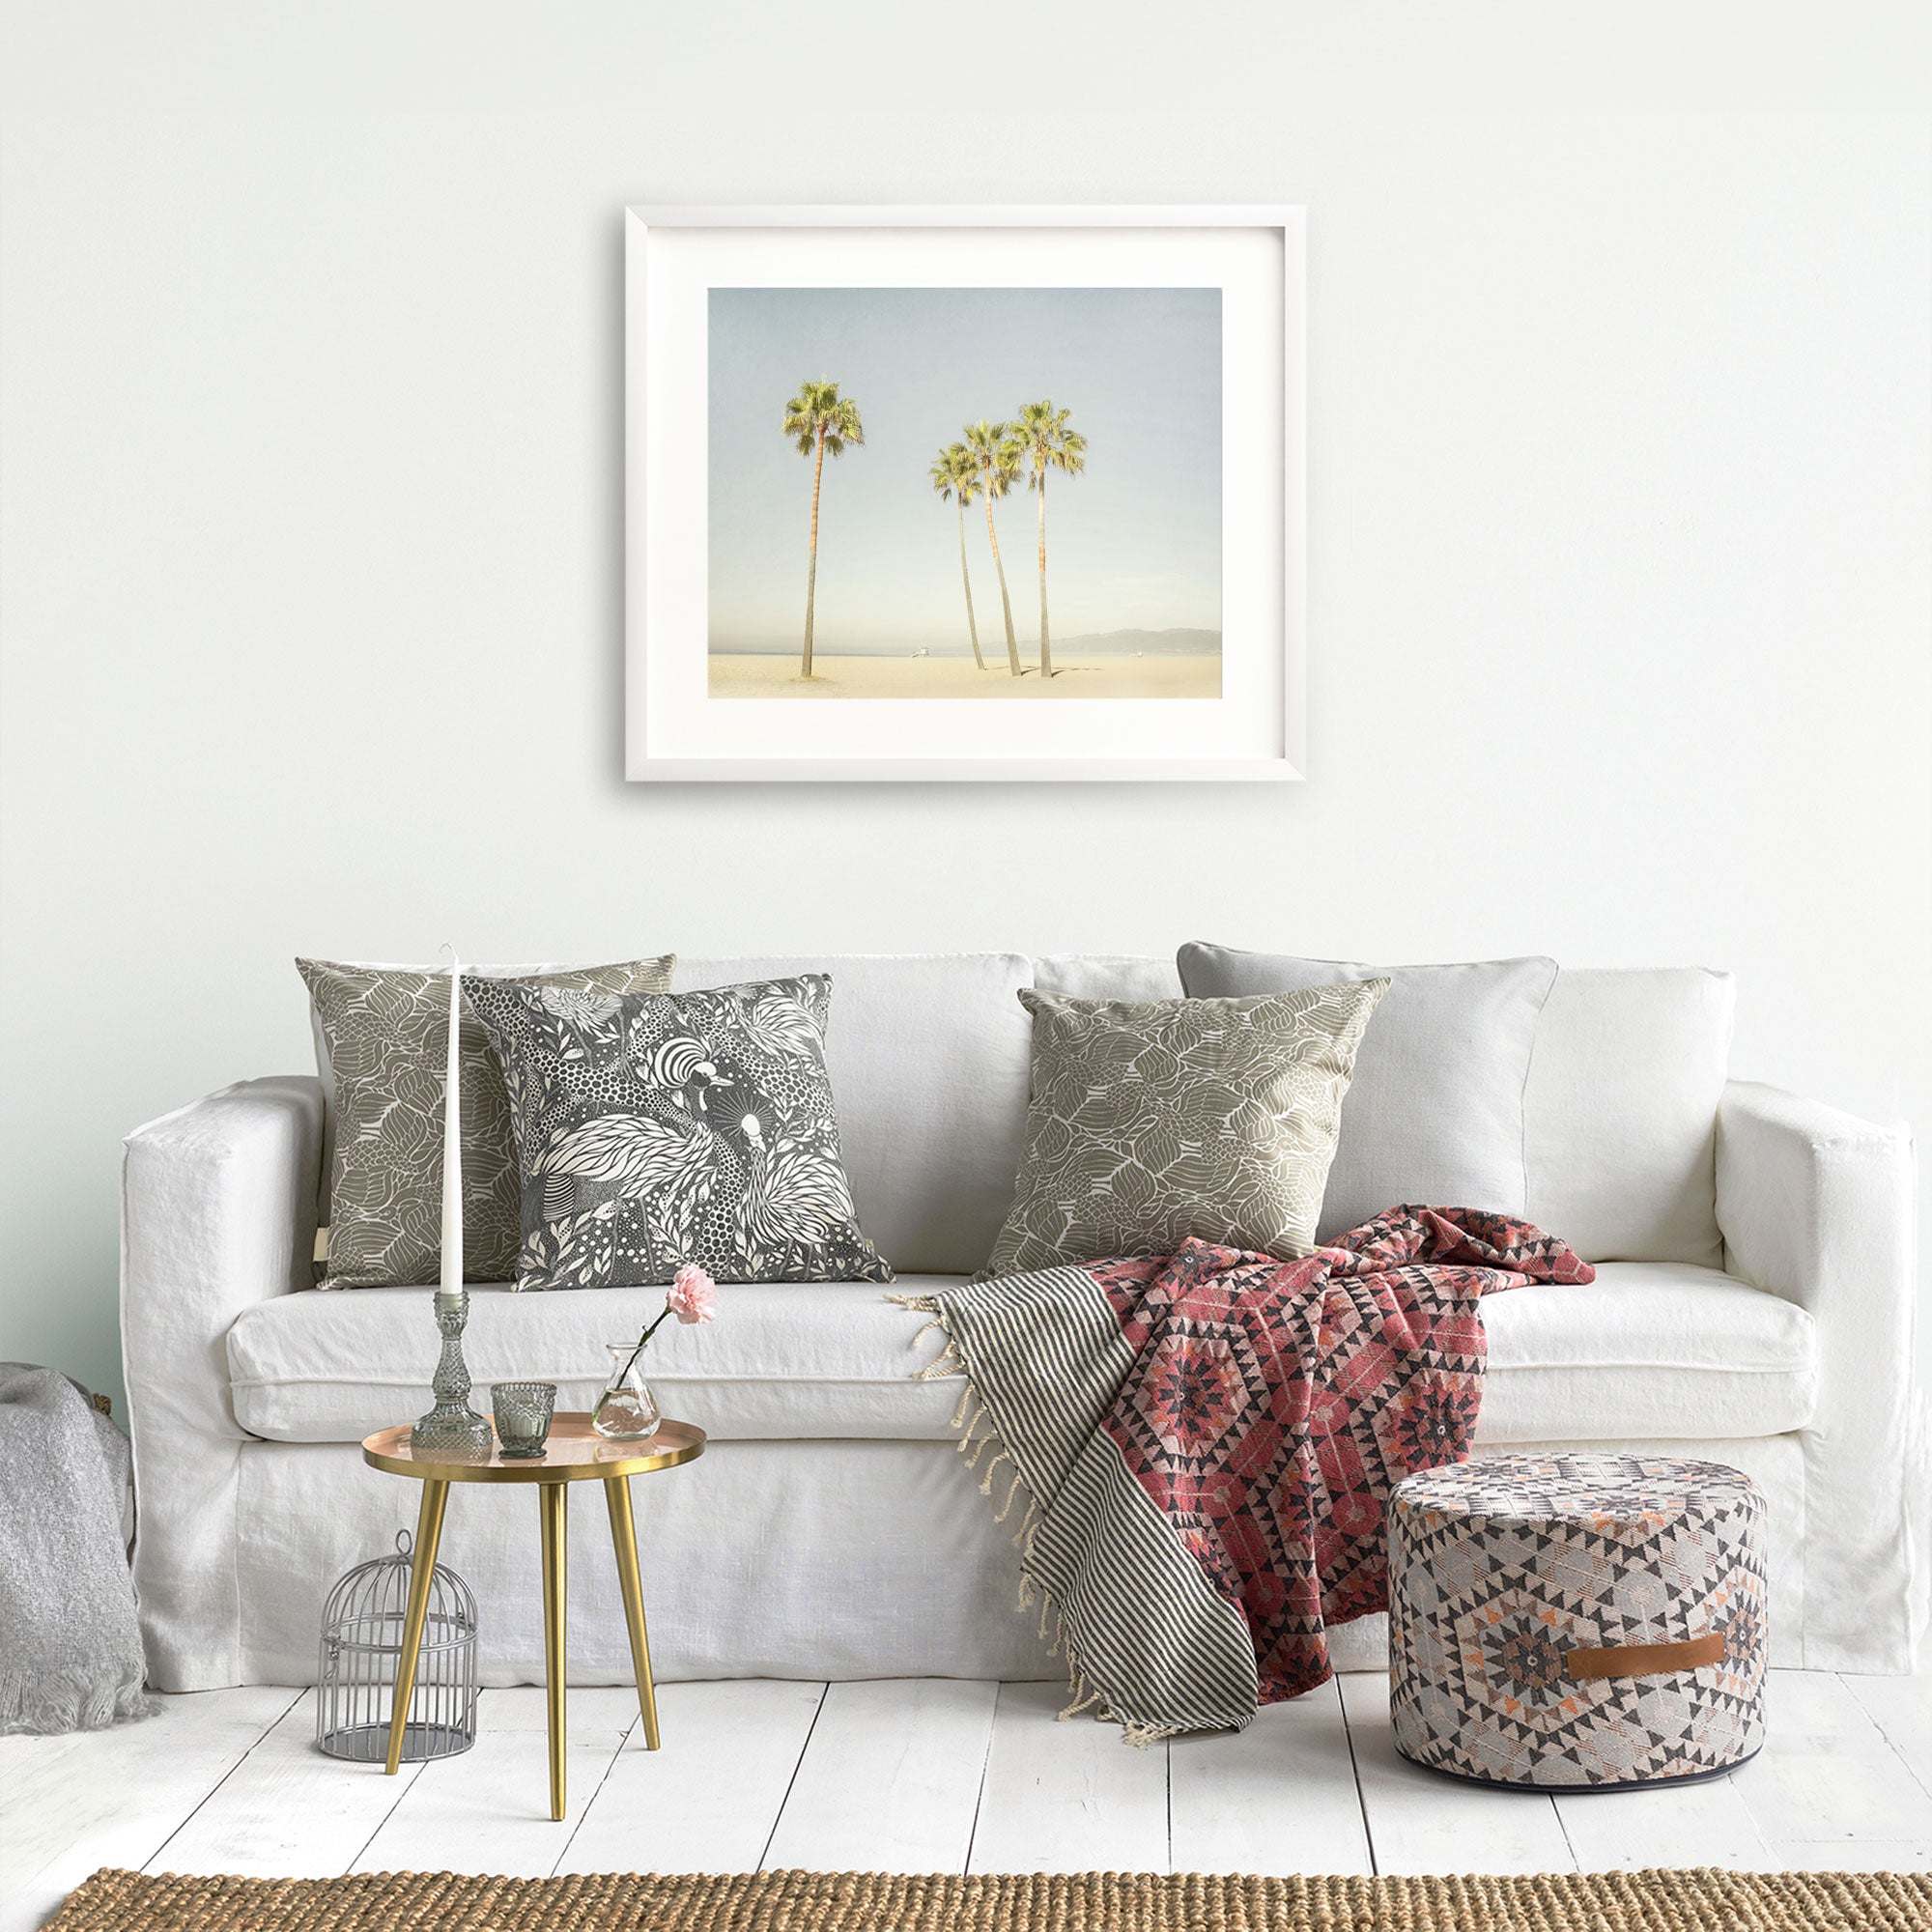 A cozy living room scene with a white sofa adorned with patterned cushions, a framed California Beach Palm Tree Print from Offley Green on the wall, a small gold table with a plant and books, a patterned ottoman, and a decorative birdcage.